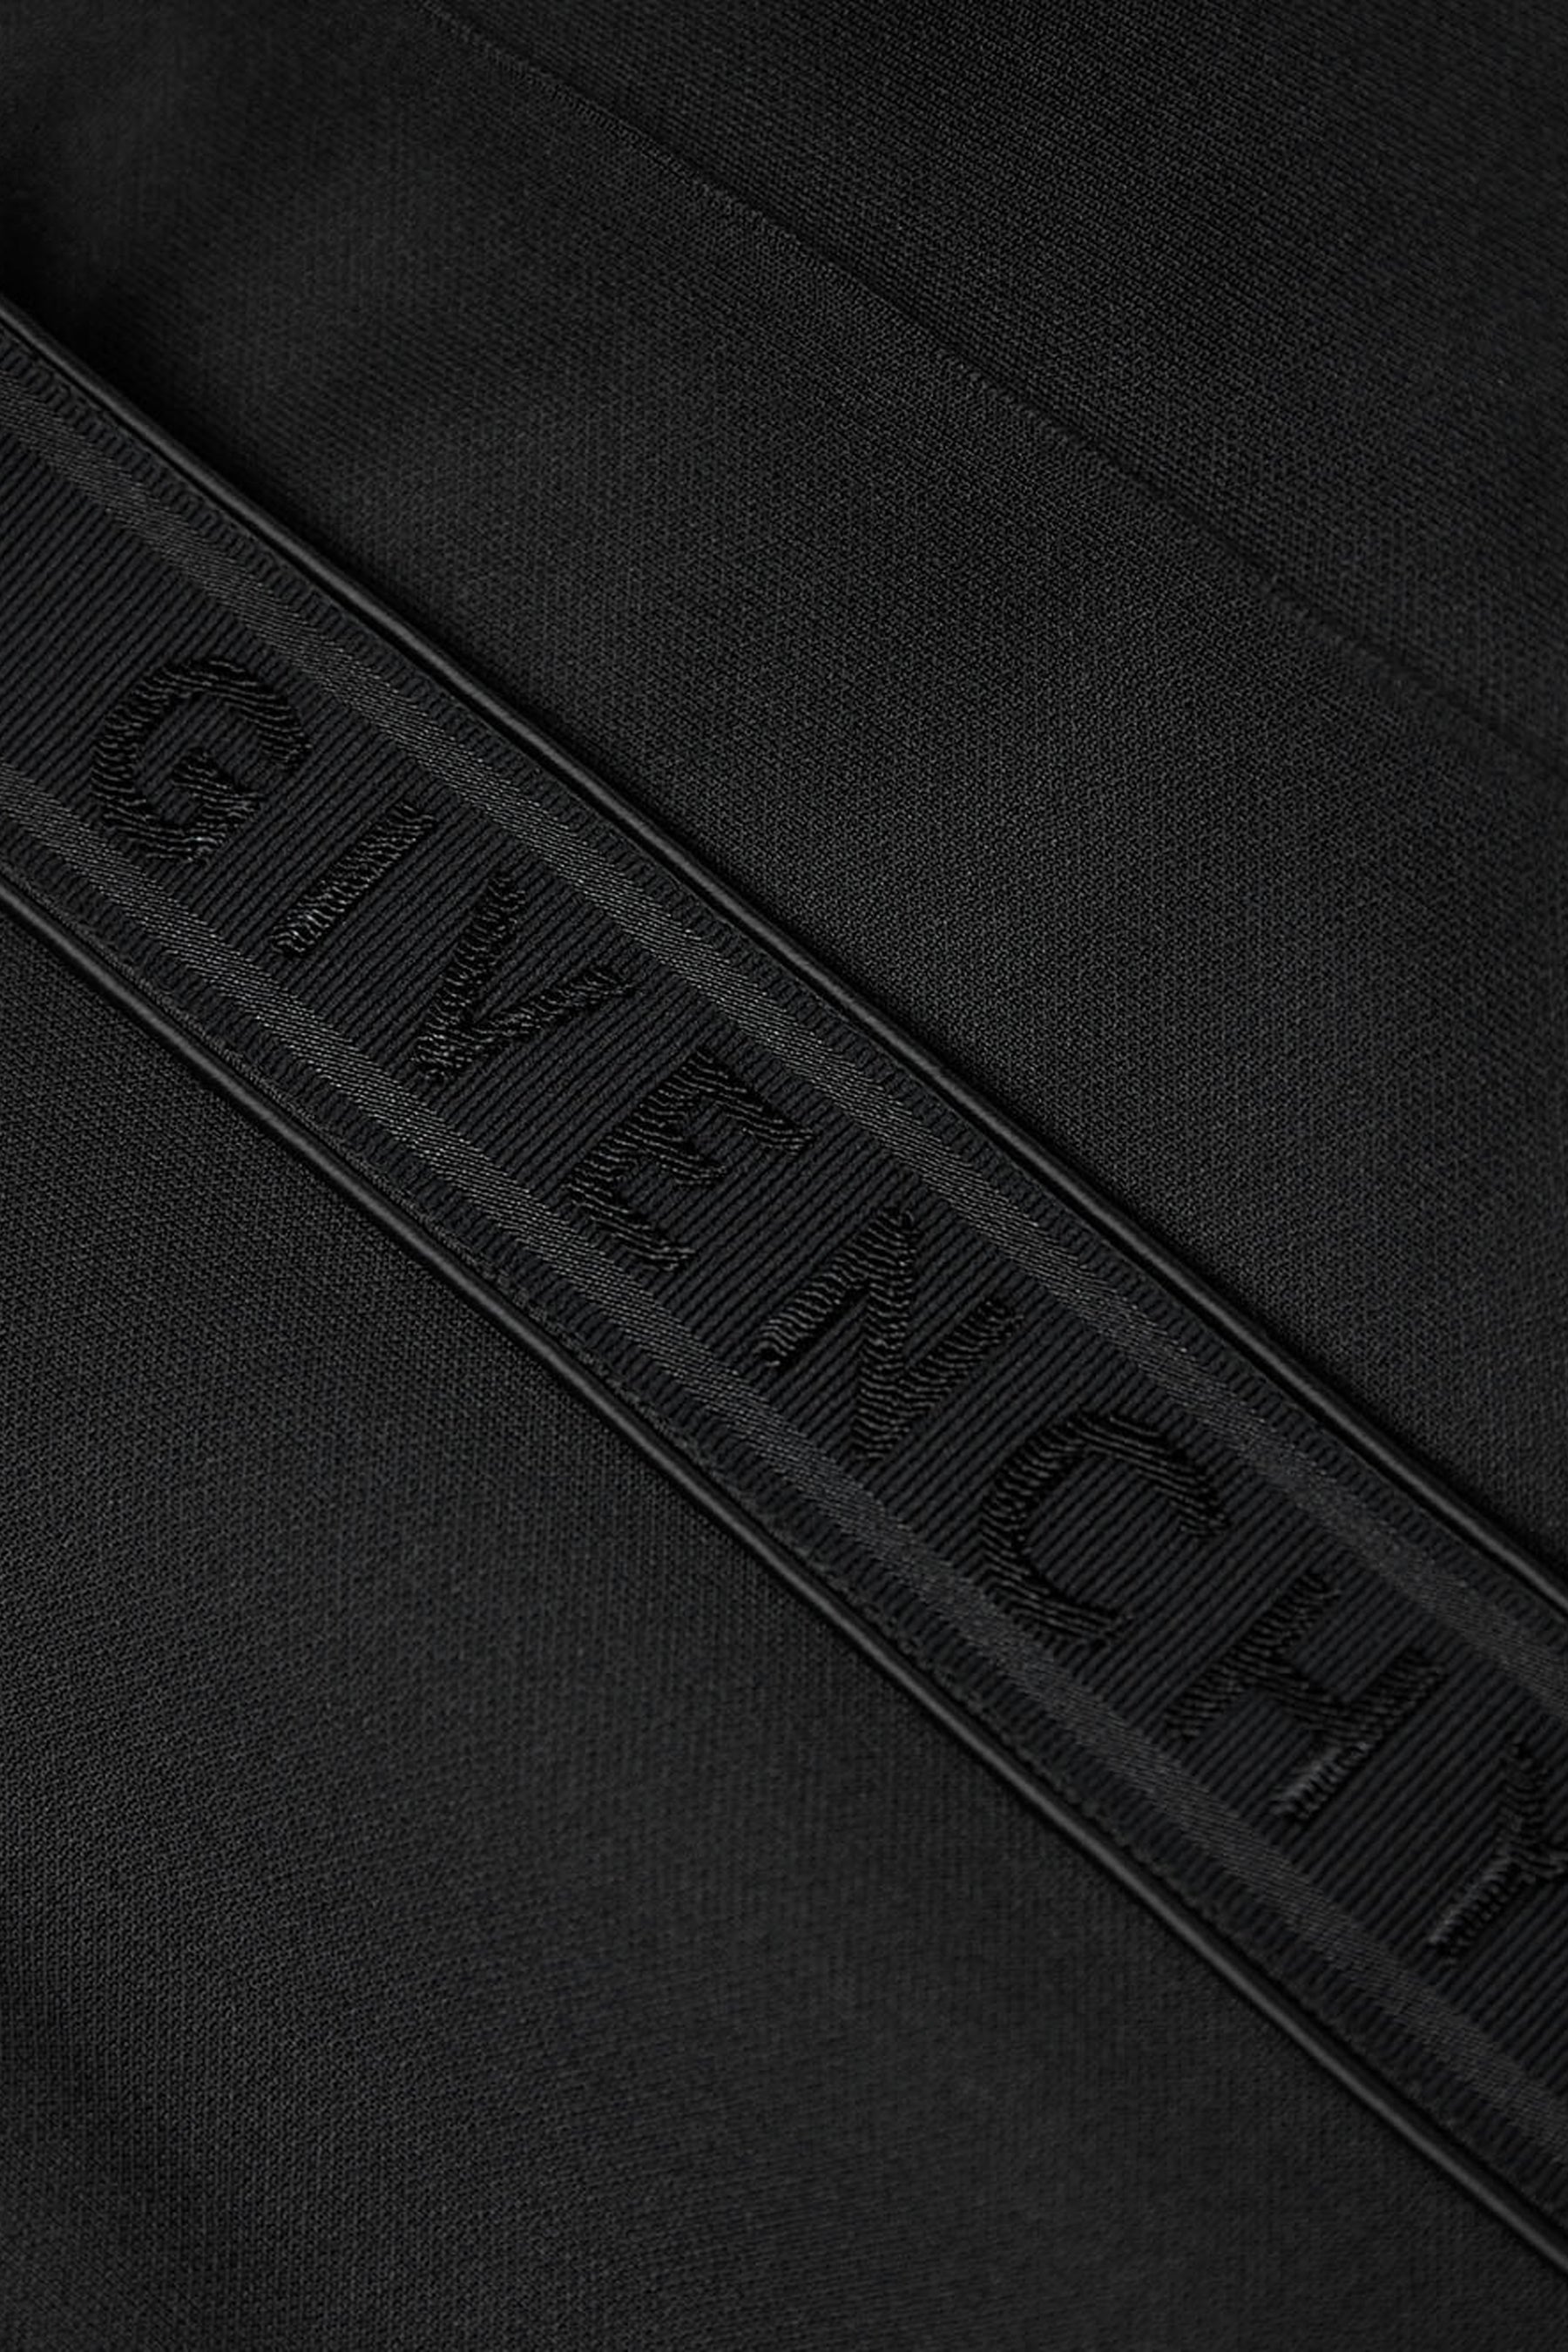 Givenchy technical jersey track trousers